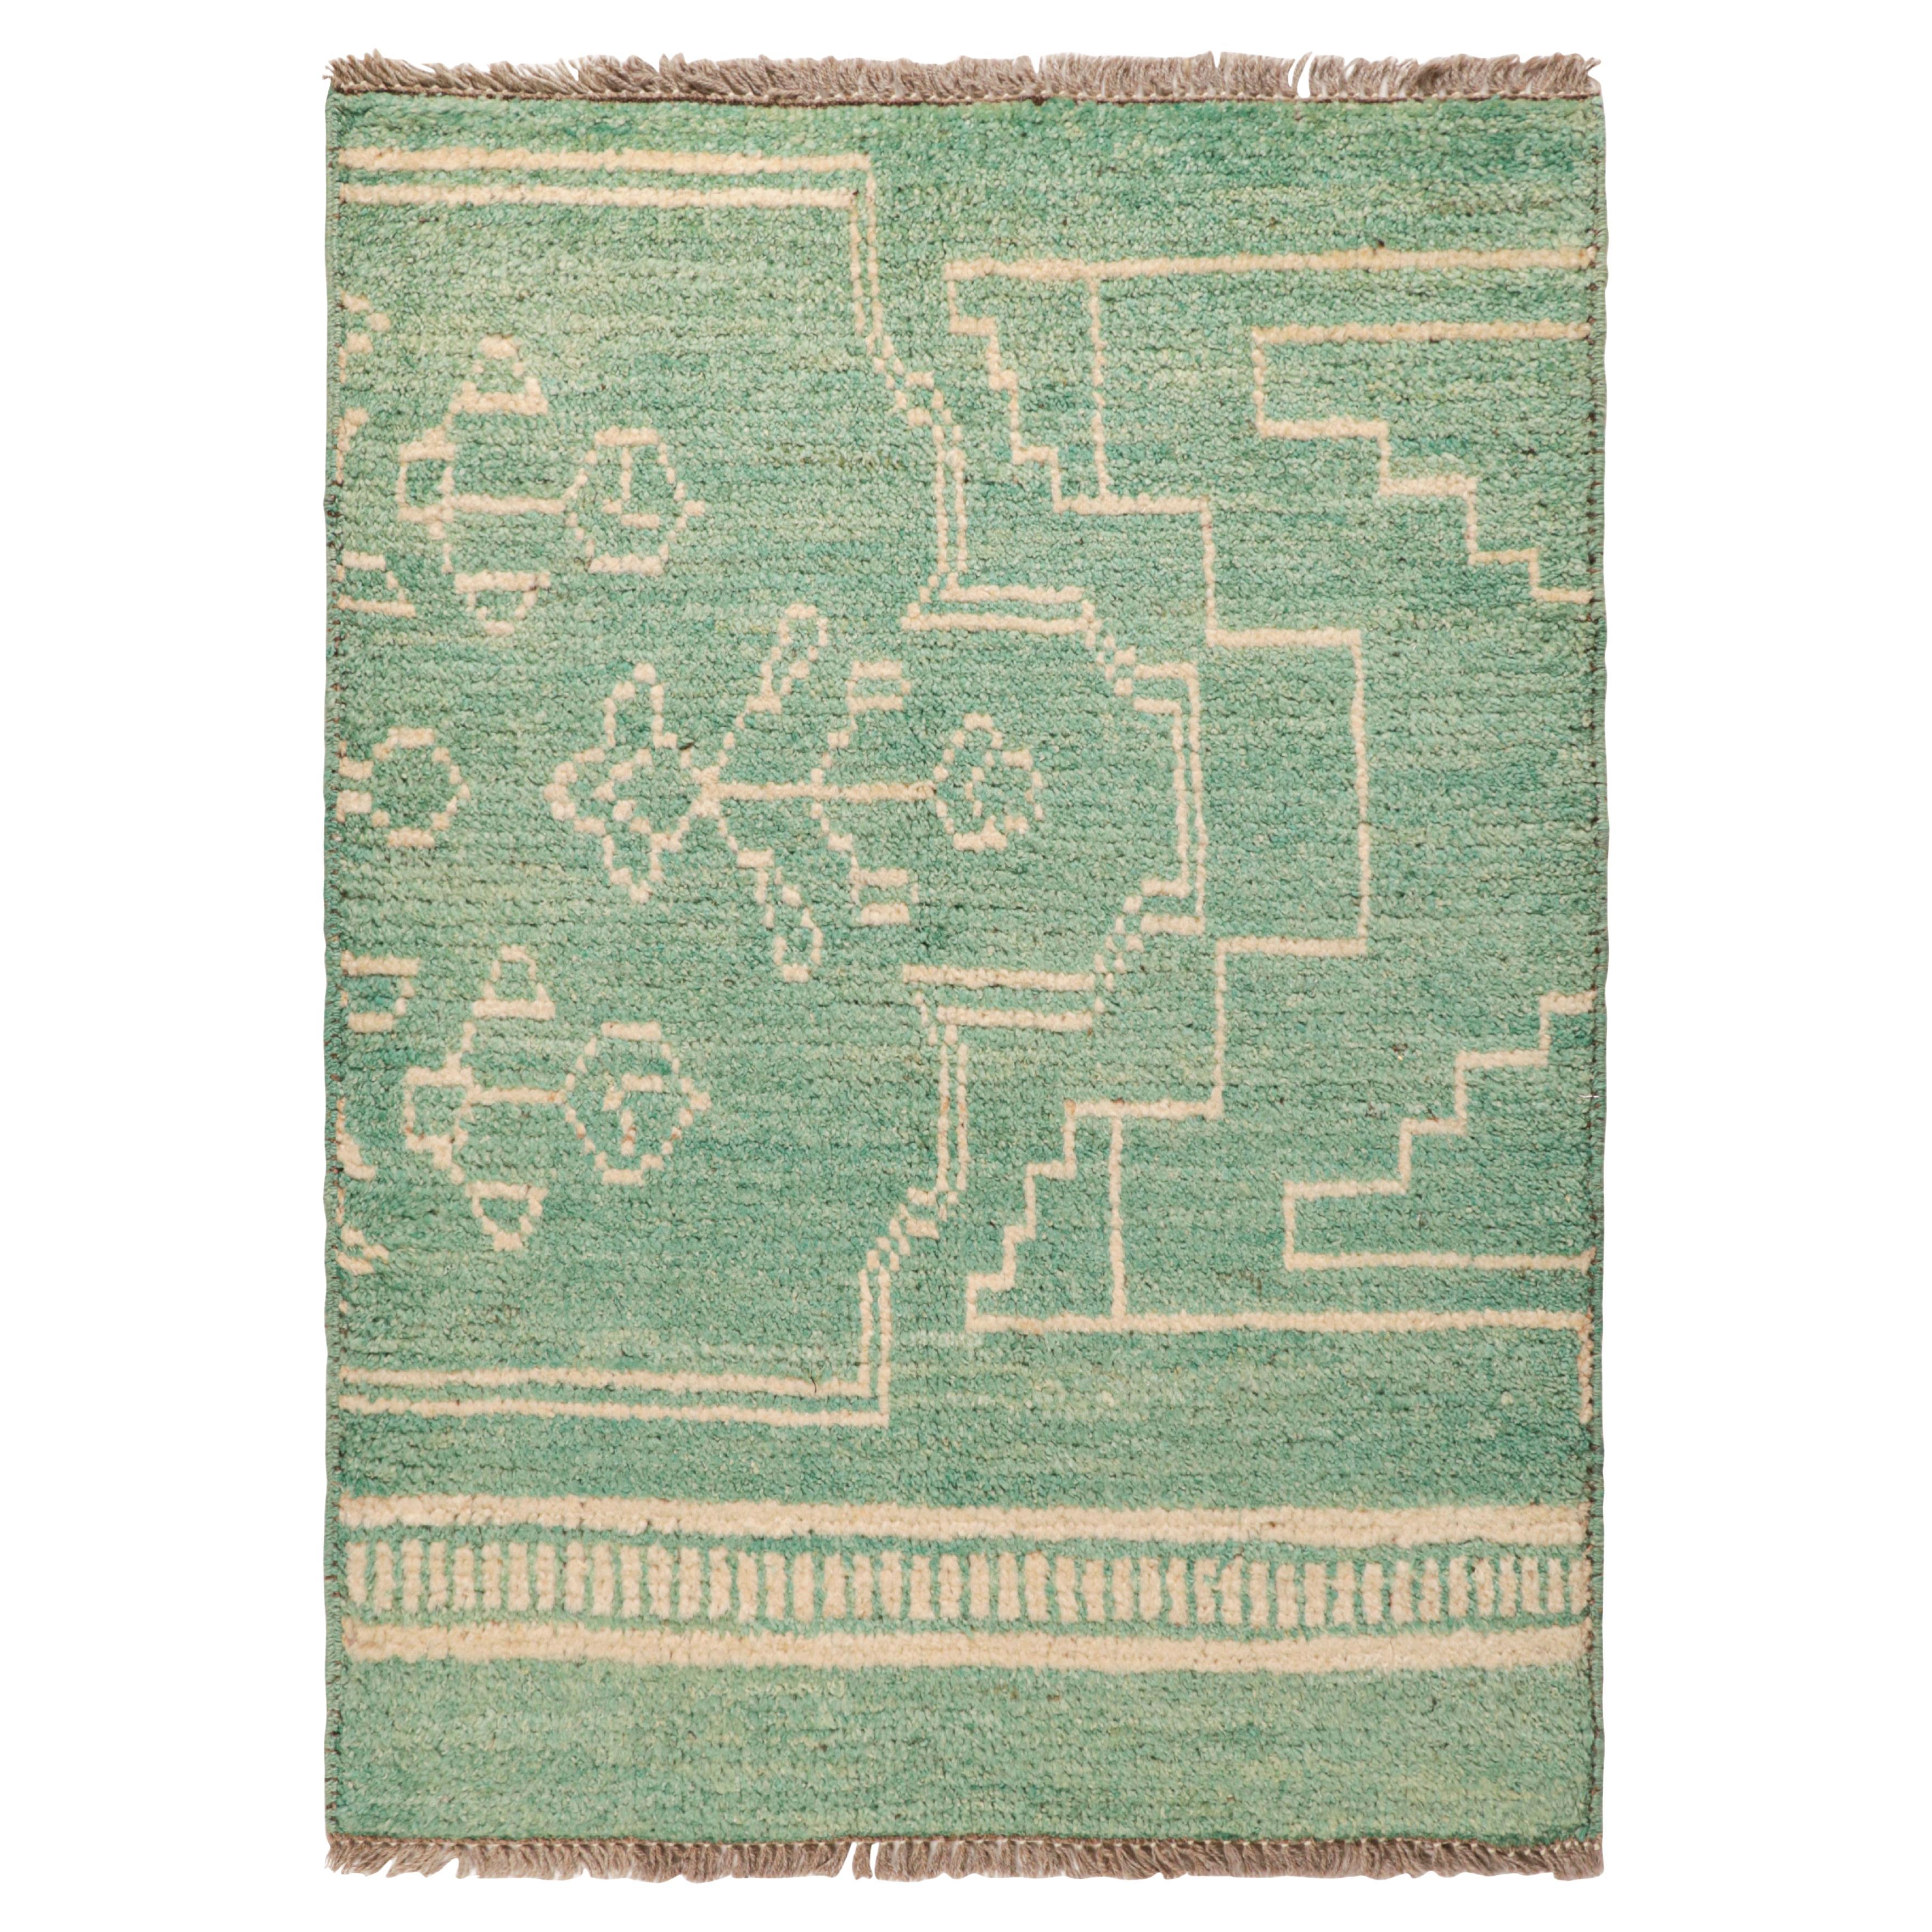 Rug & Kilim’s Moroccan Style Rug in Turquoise with Tribal Geometric Patterns For Sale